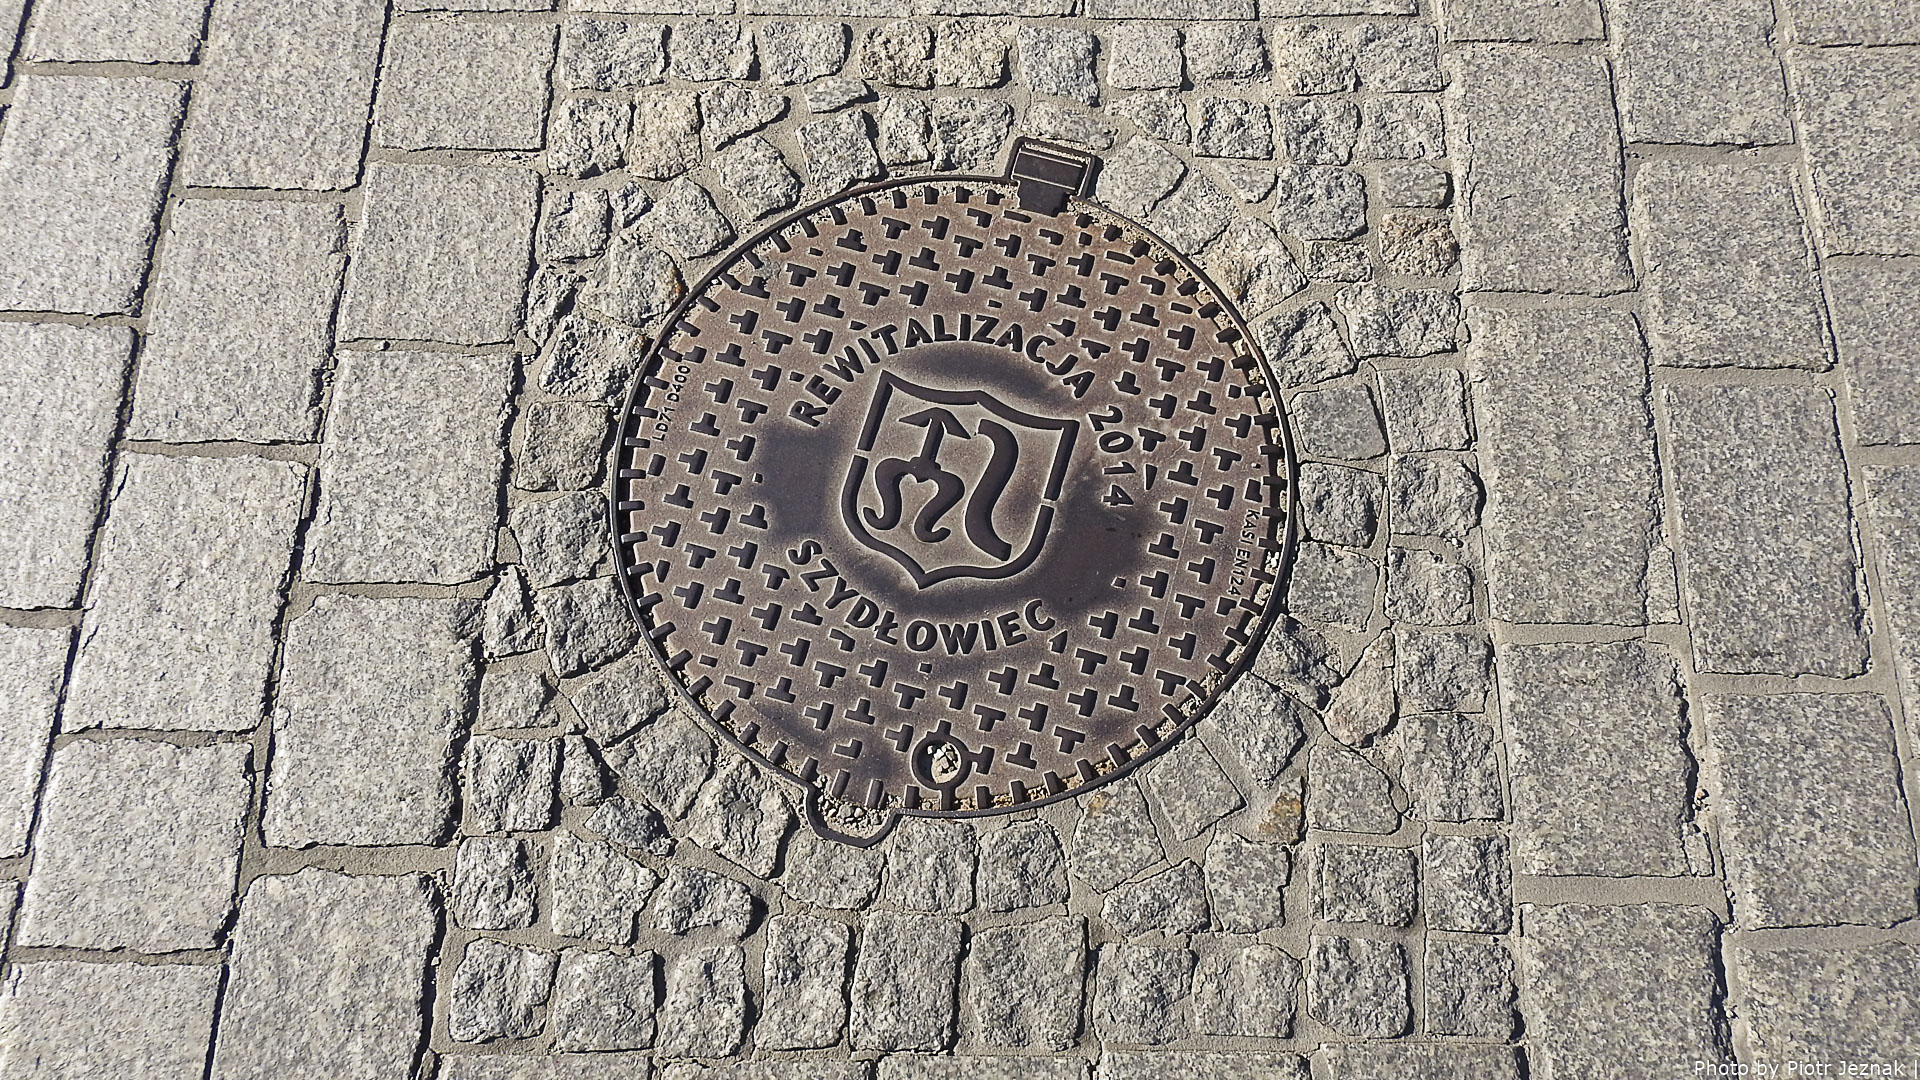 Manhole cover in Szydlowiec